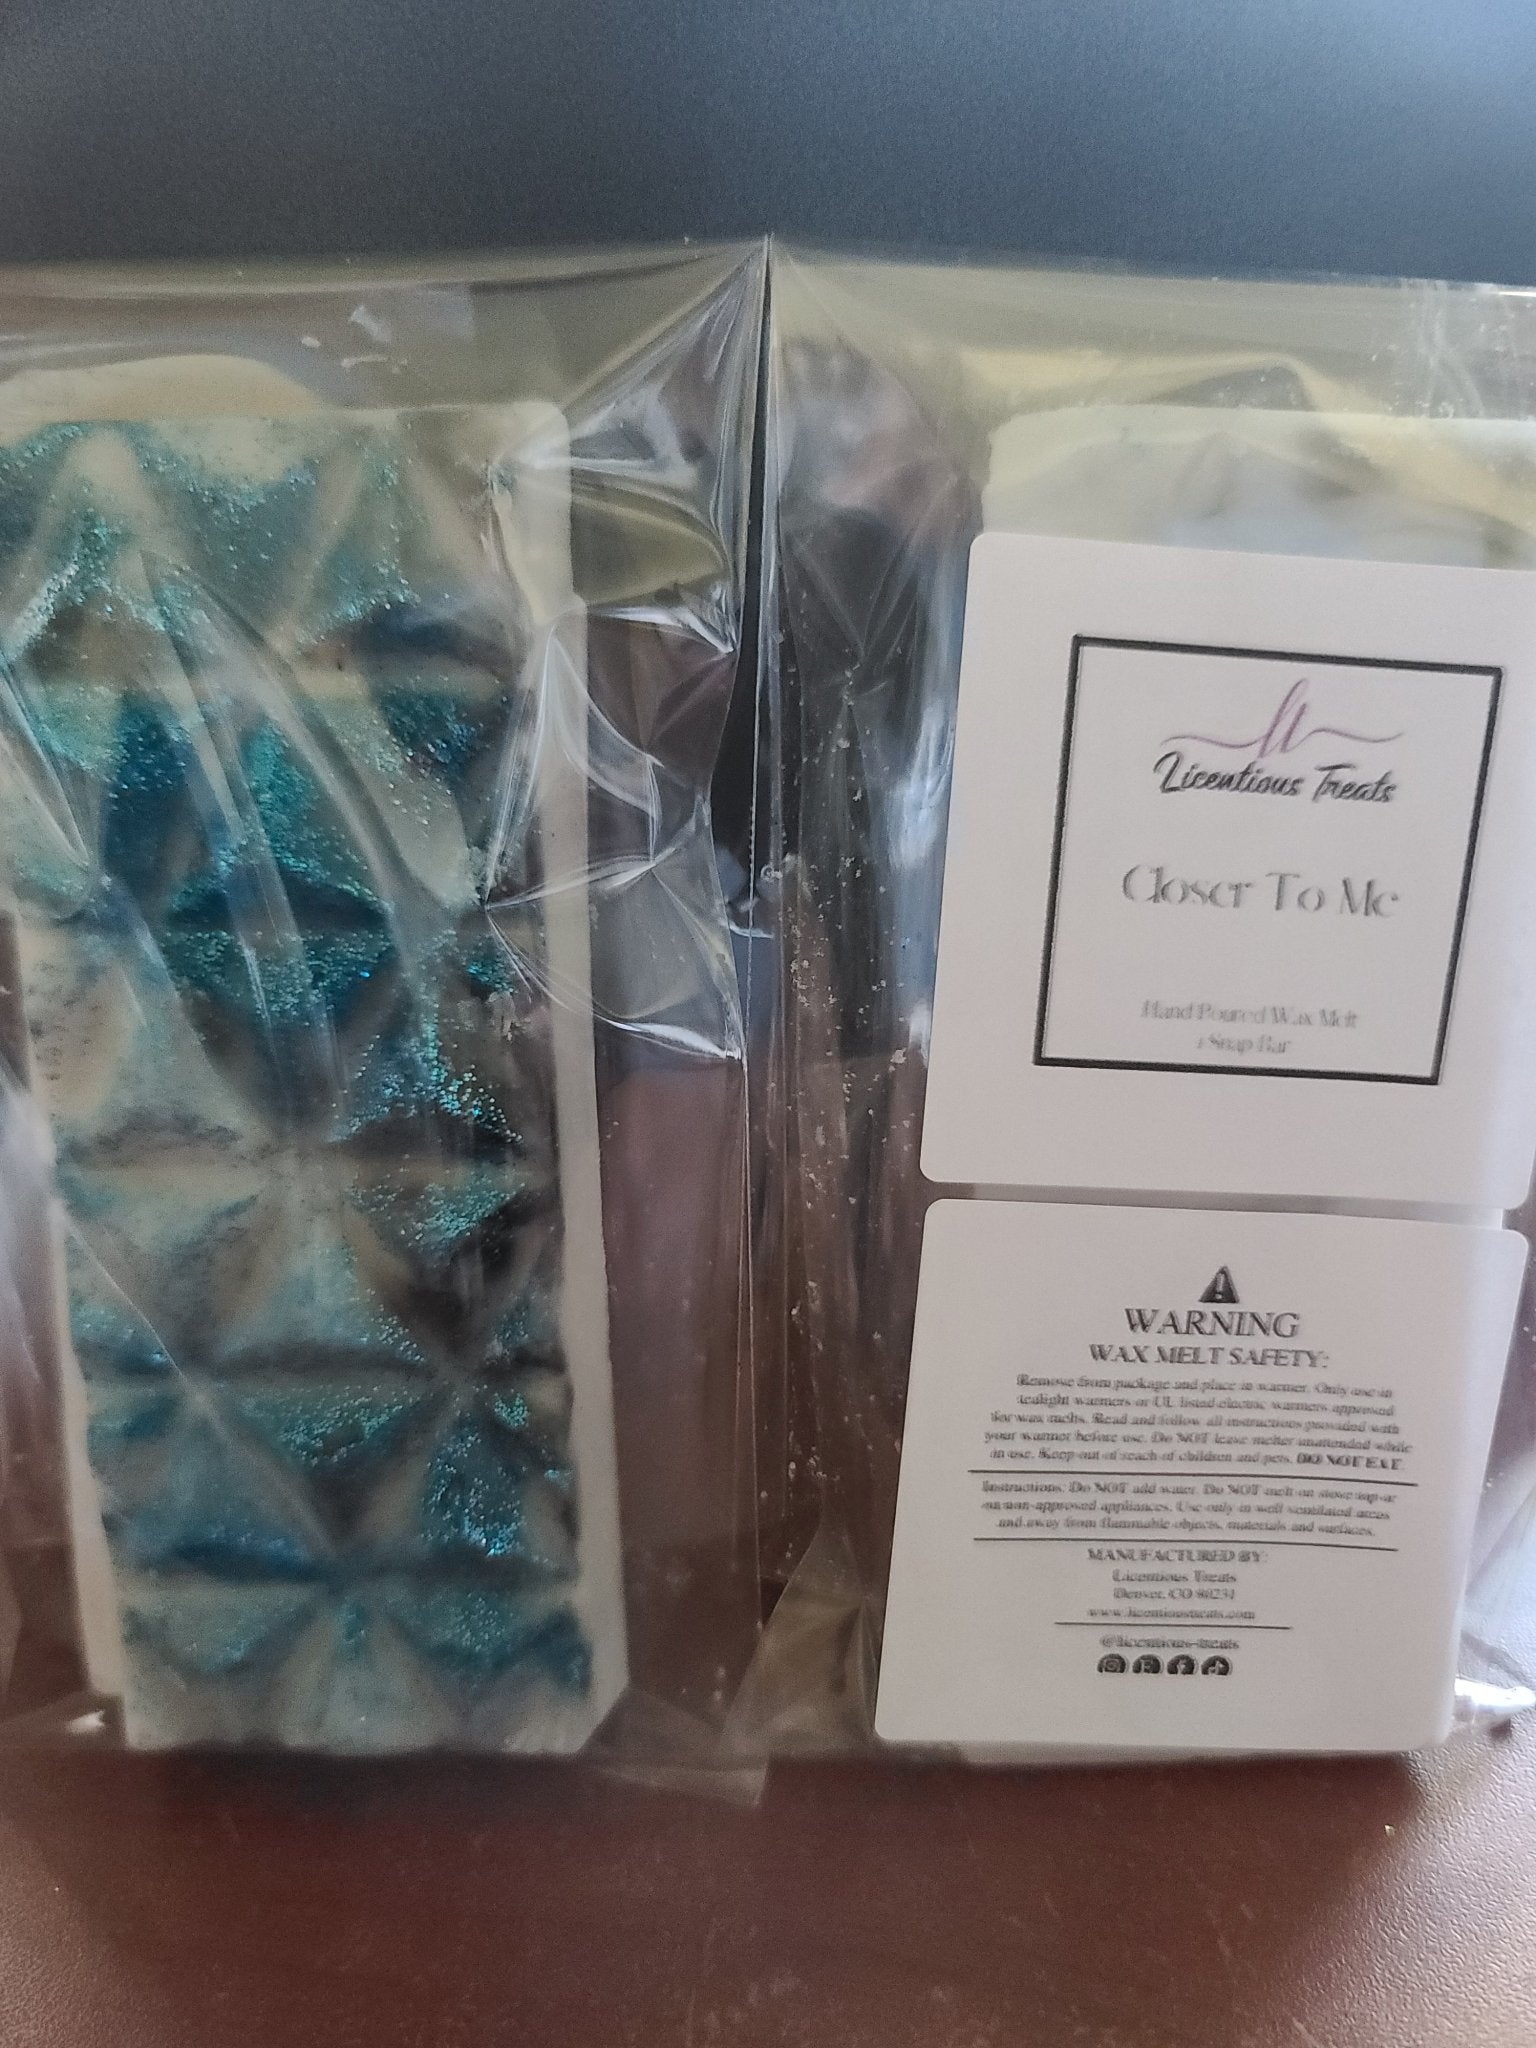 Wax Melts - Closer To Me - Licentious TreatsWax Melts - Closer To Me